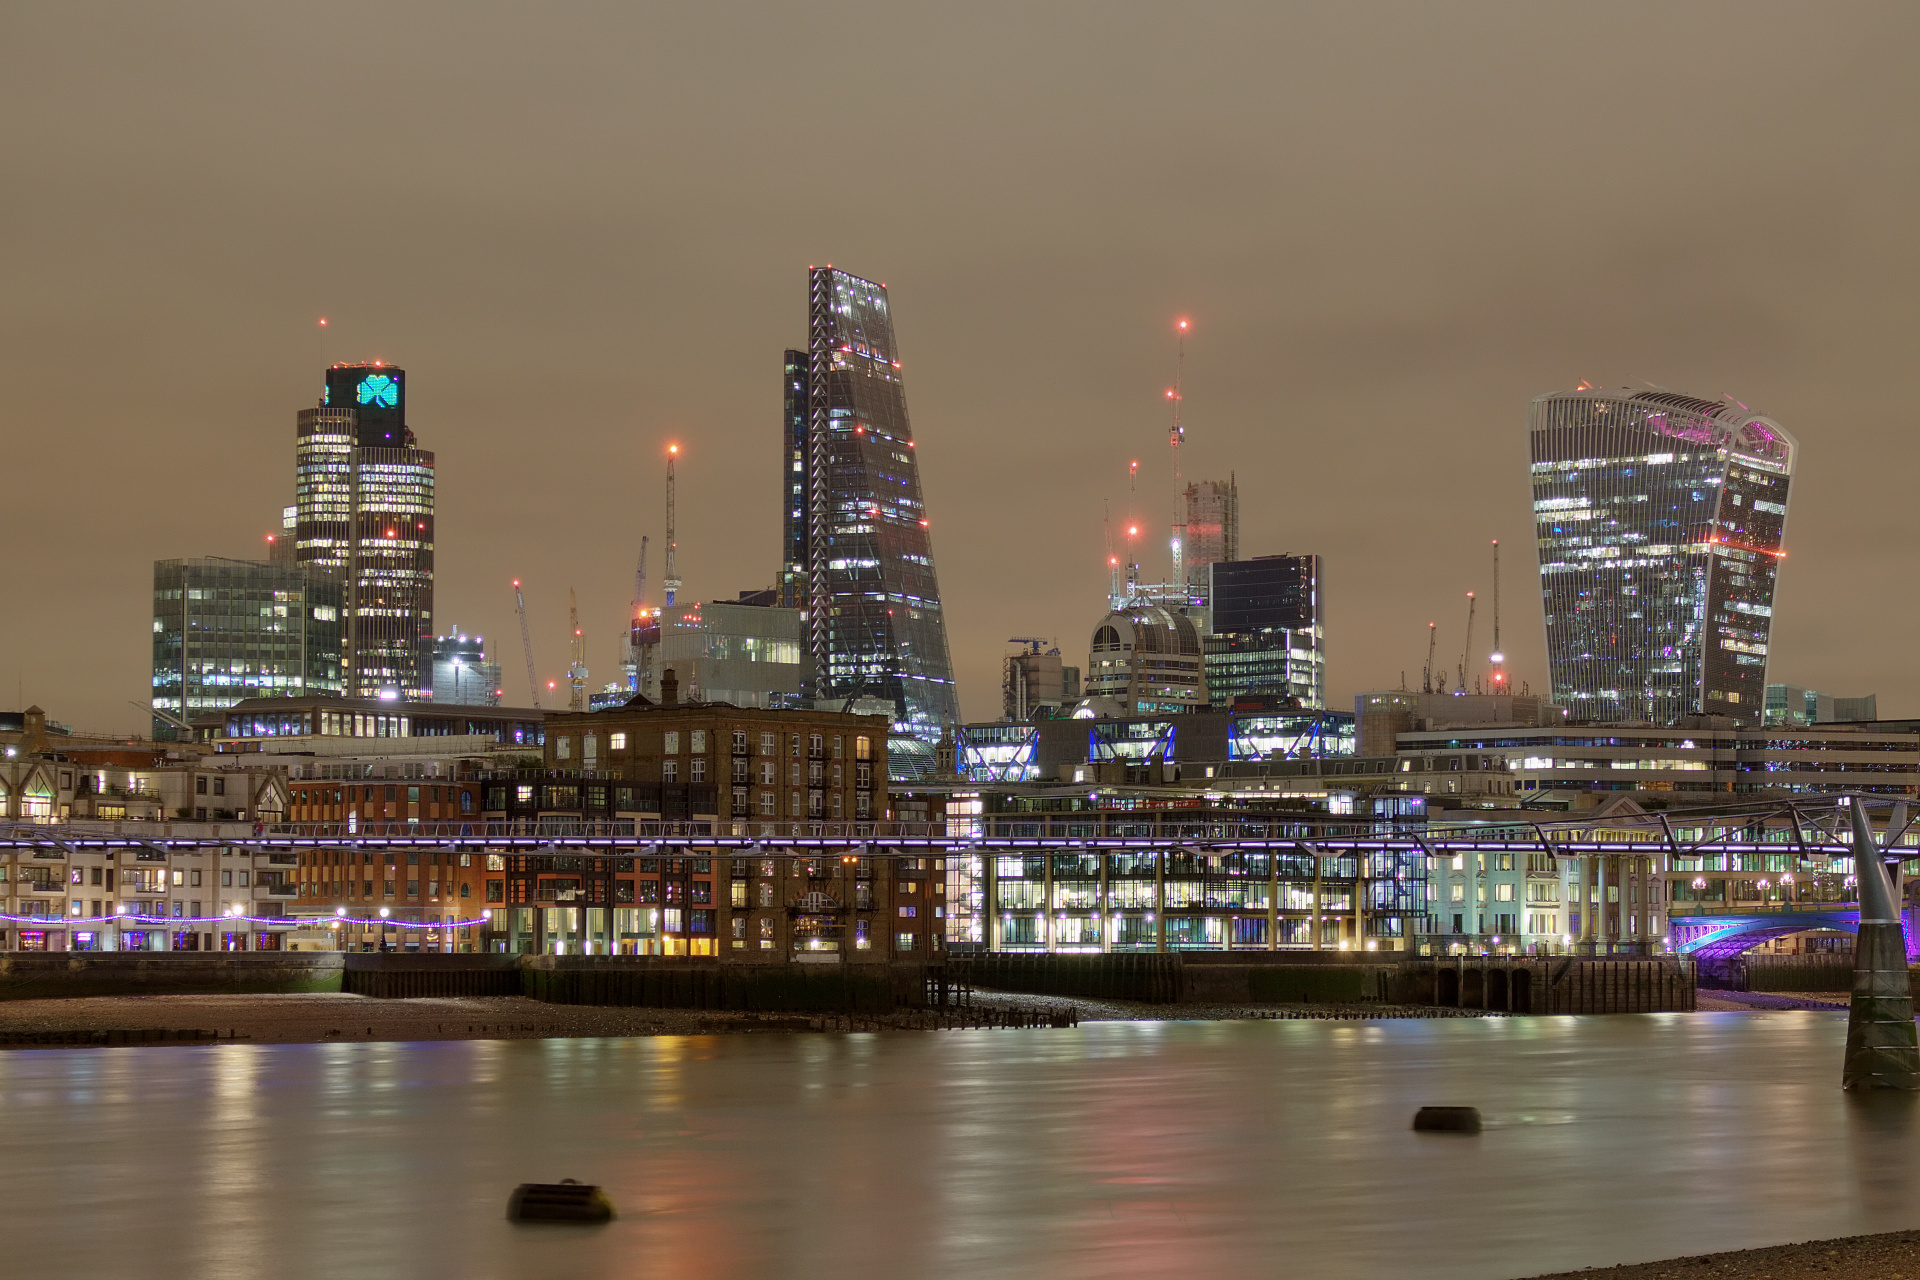 The City Of London (Travels » London » London at Night)